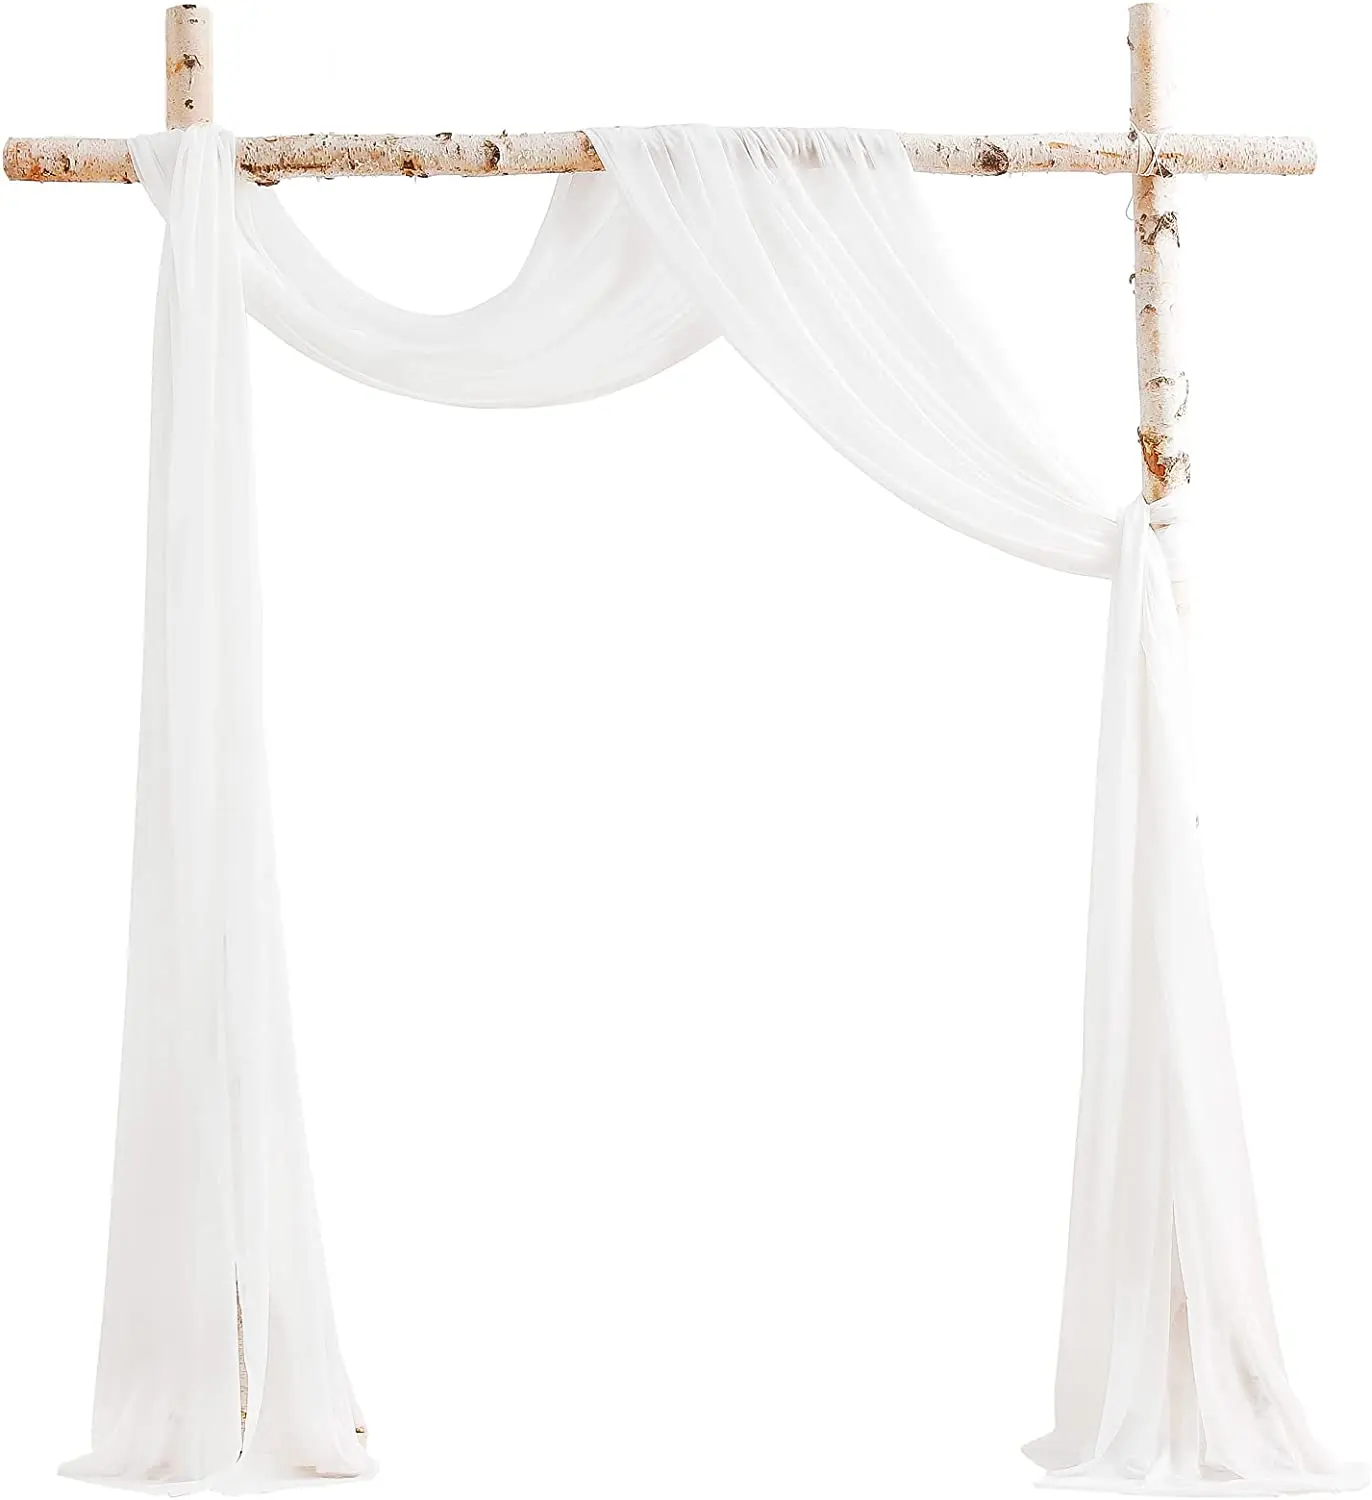 Wedding Arch Draping White Fabric Chiffon Backdrop Drapery Curtains For Wedding Decoration Swag Ceiling